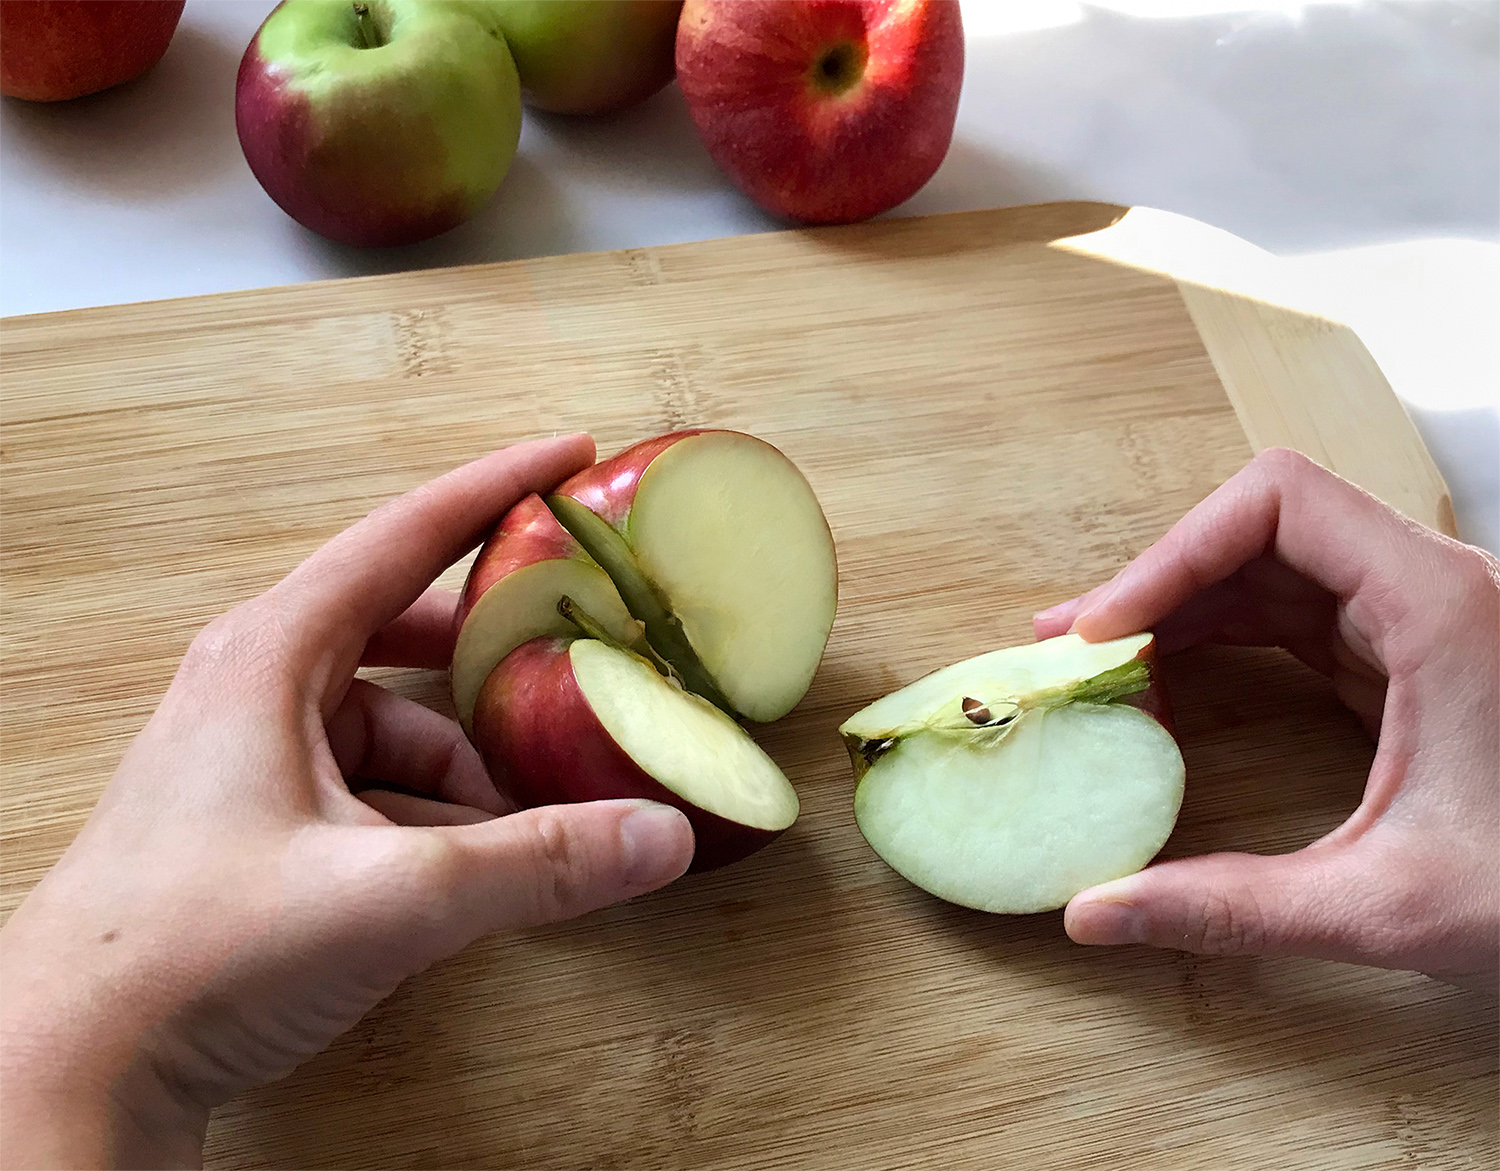 Learn About Fractions with Apples